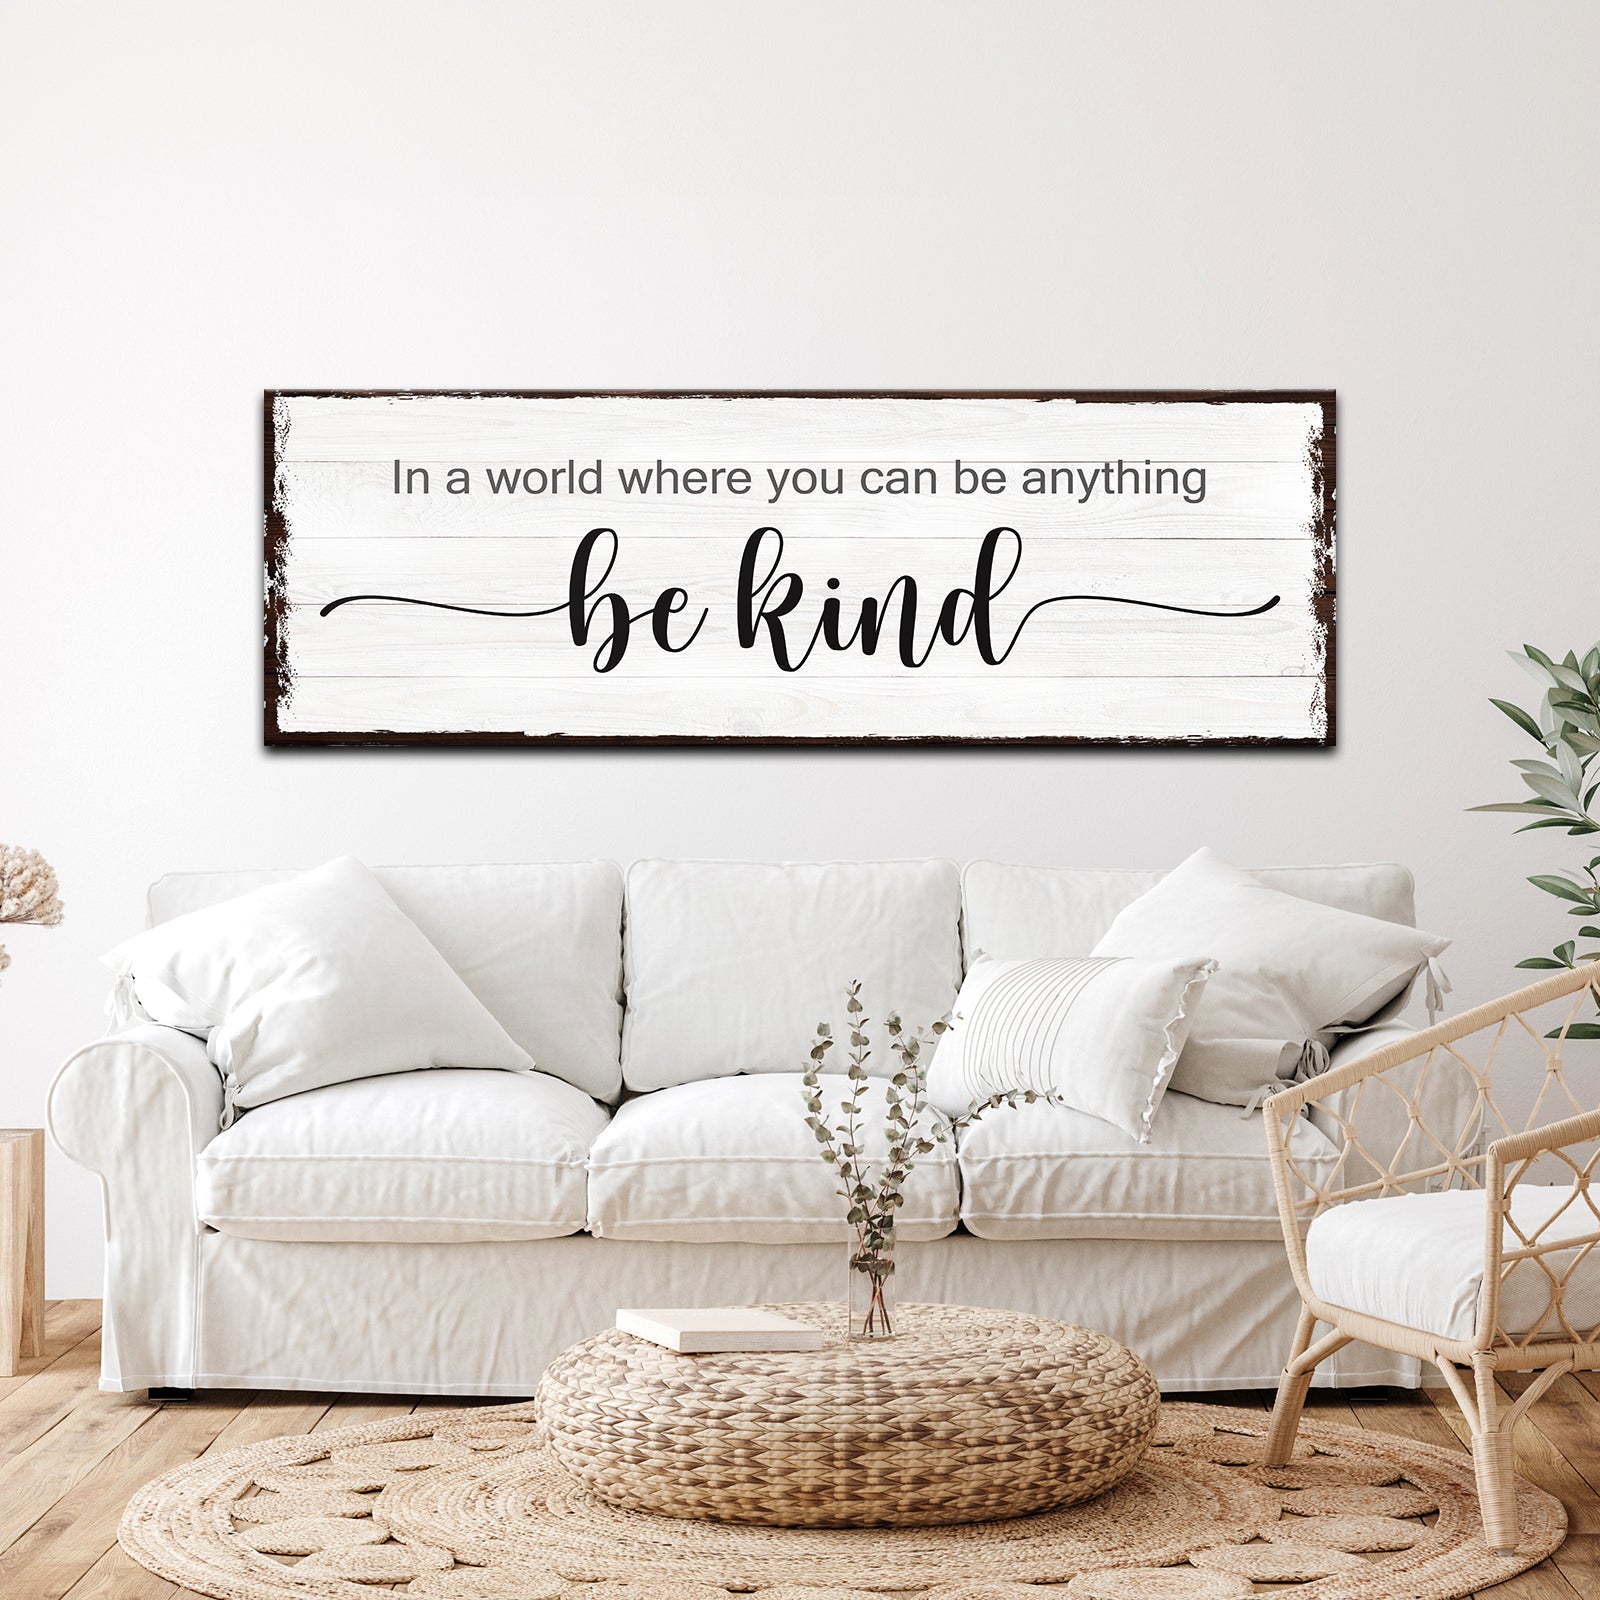 Be Kind Sign - Image by Tailored Canvases